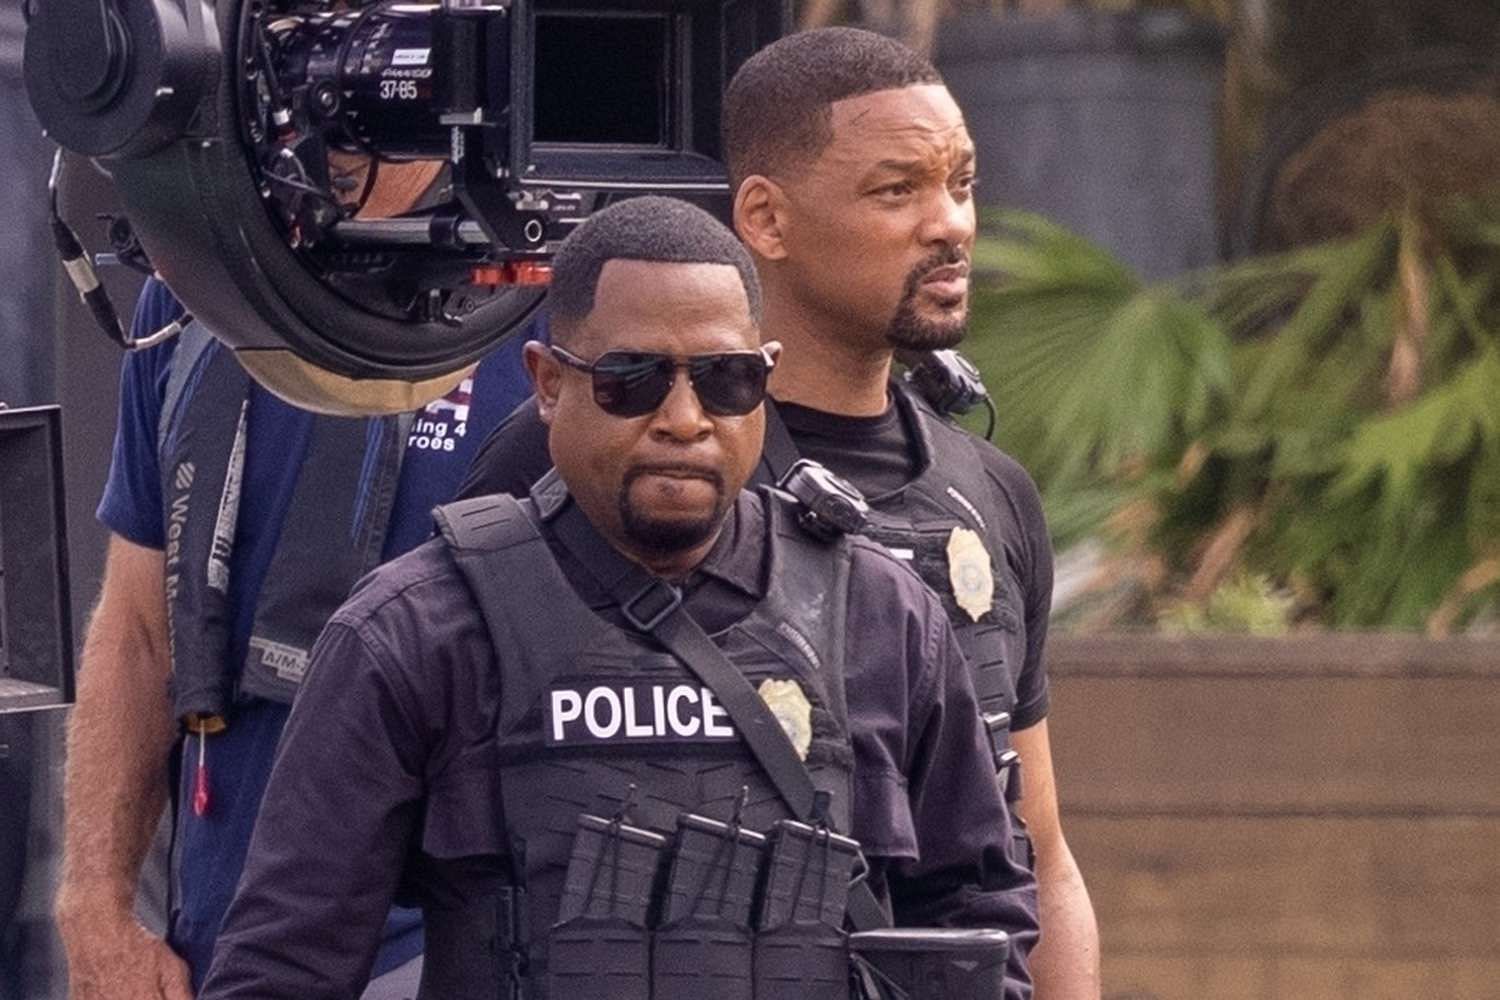 Martin Lawrence and Will Smith filming for the film. (Photo via Backgrid)